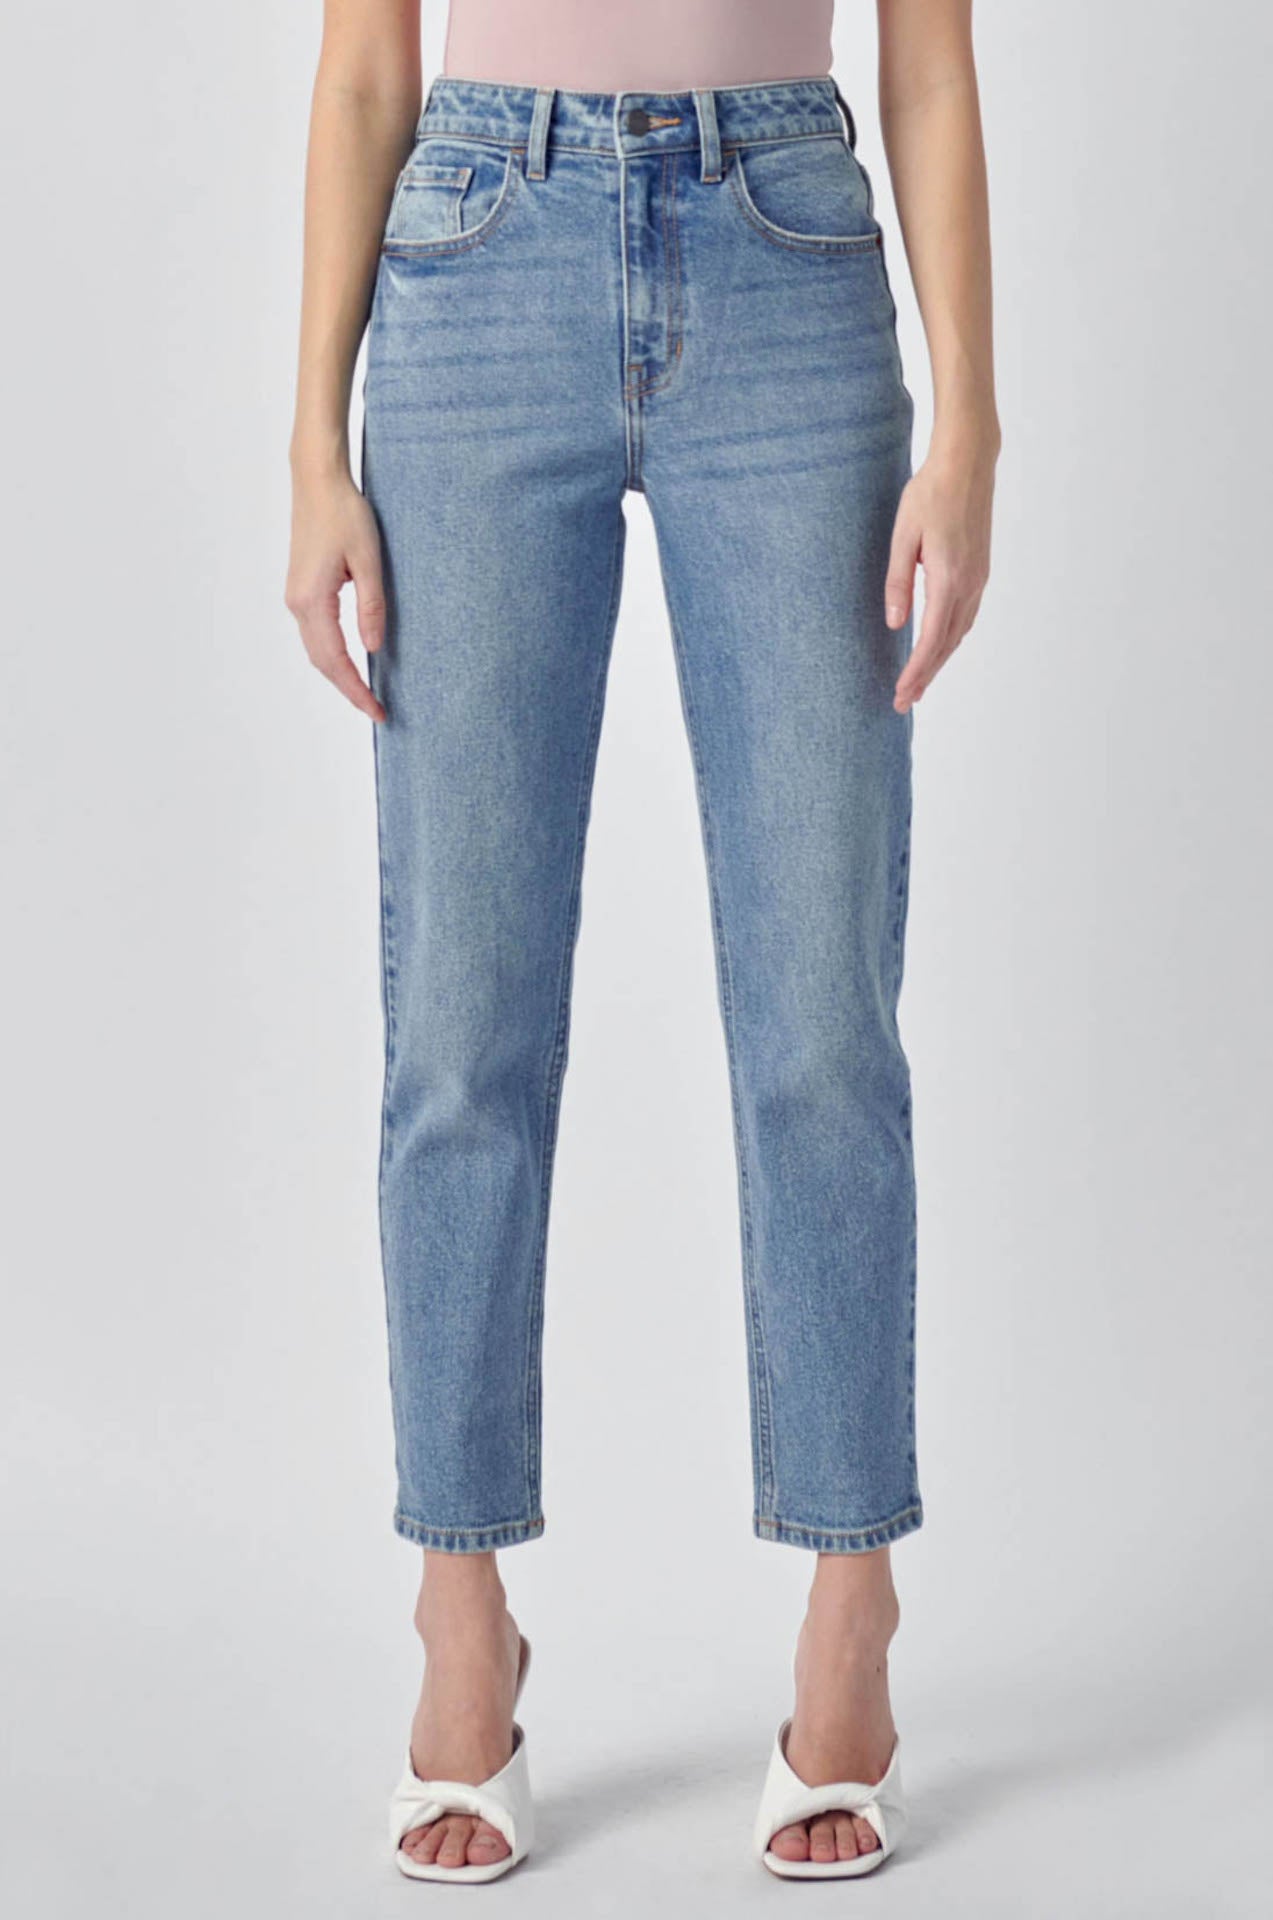 medium wash high waisted straight leg jeans by cello brand